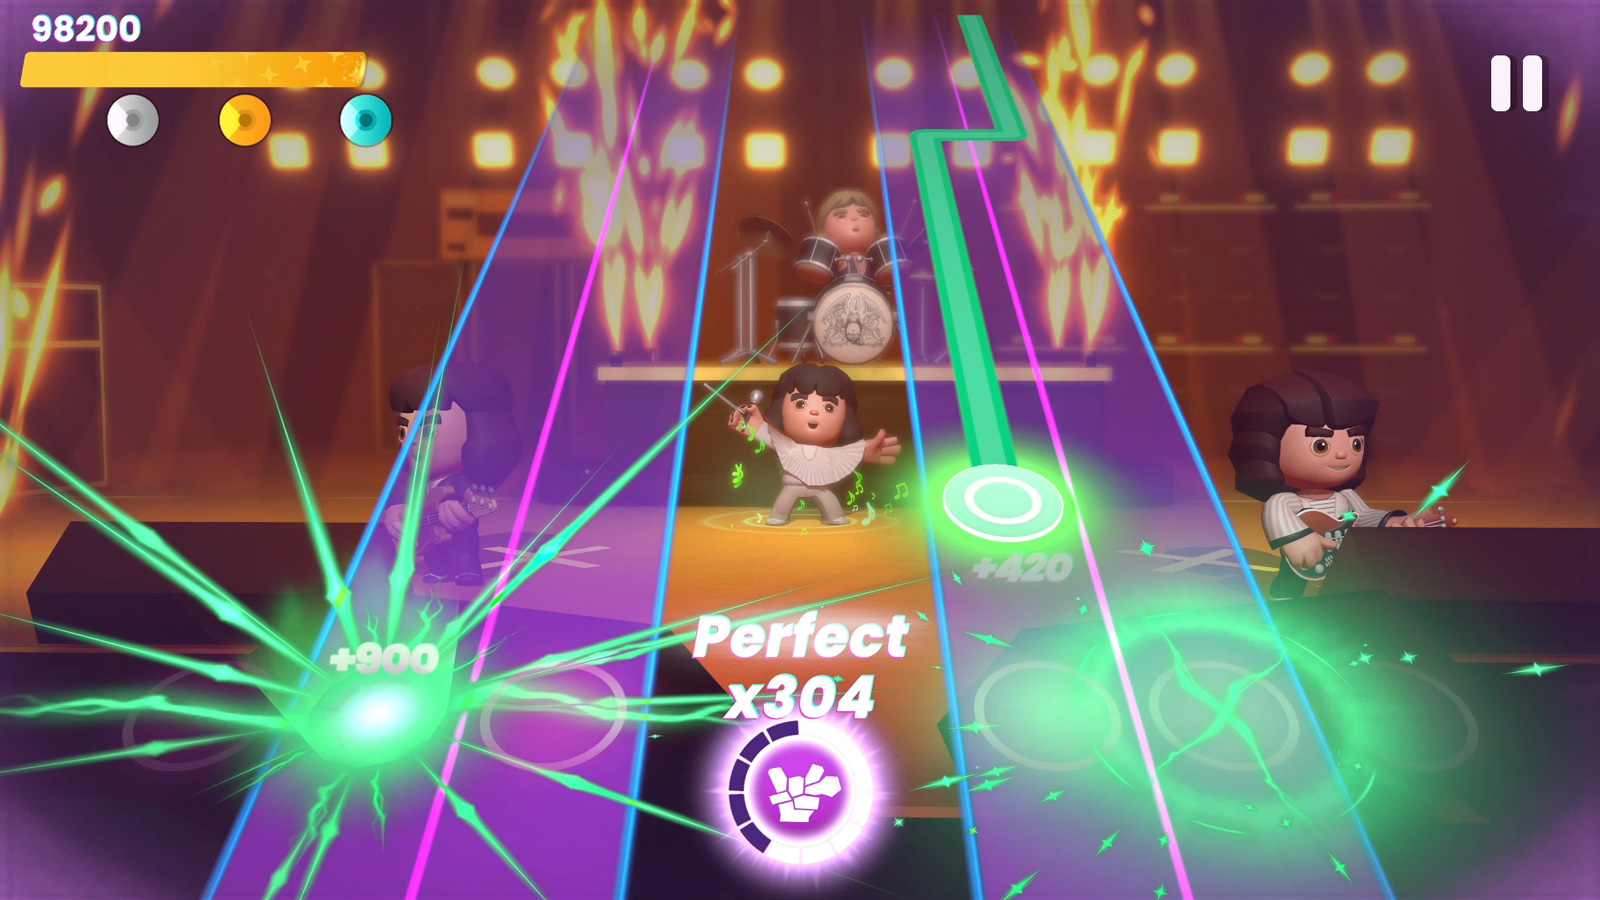 Sliding left and right reminds me of DJ Hero. (Image: Gameloft / Universal Music Group)